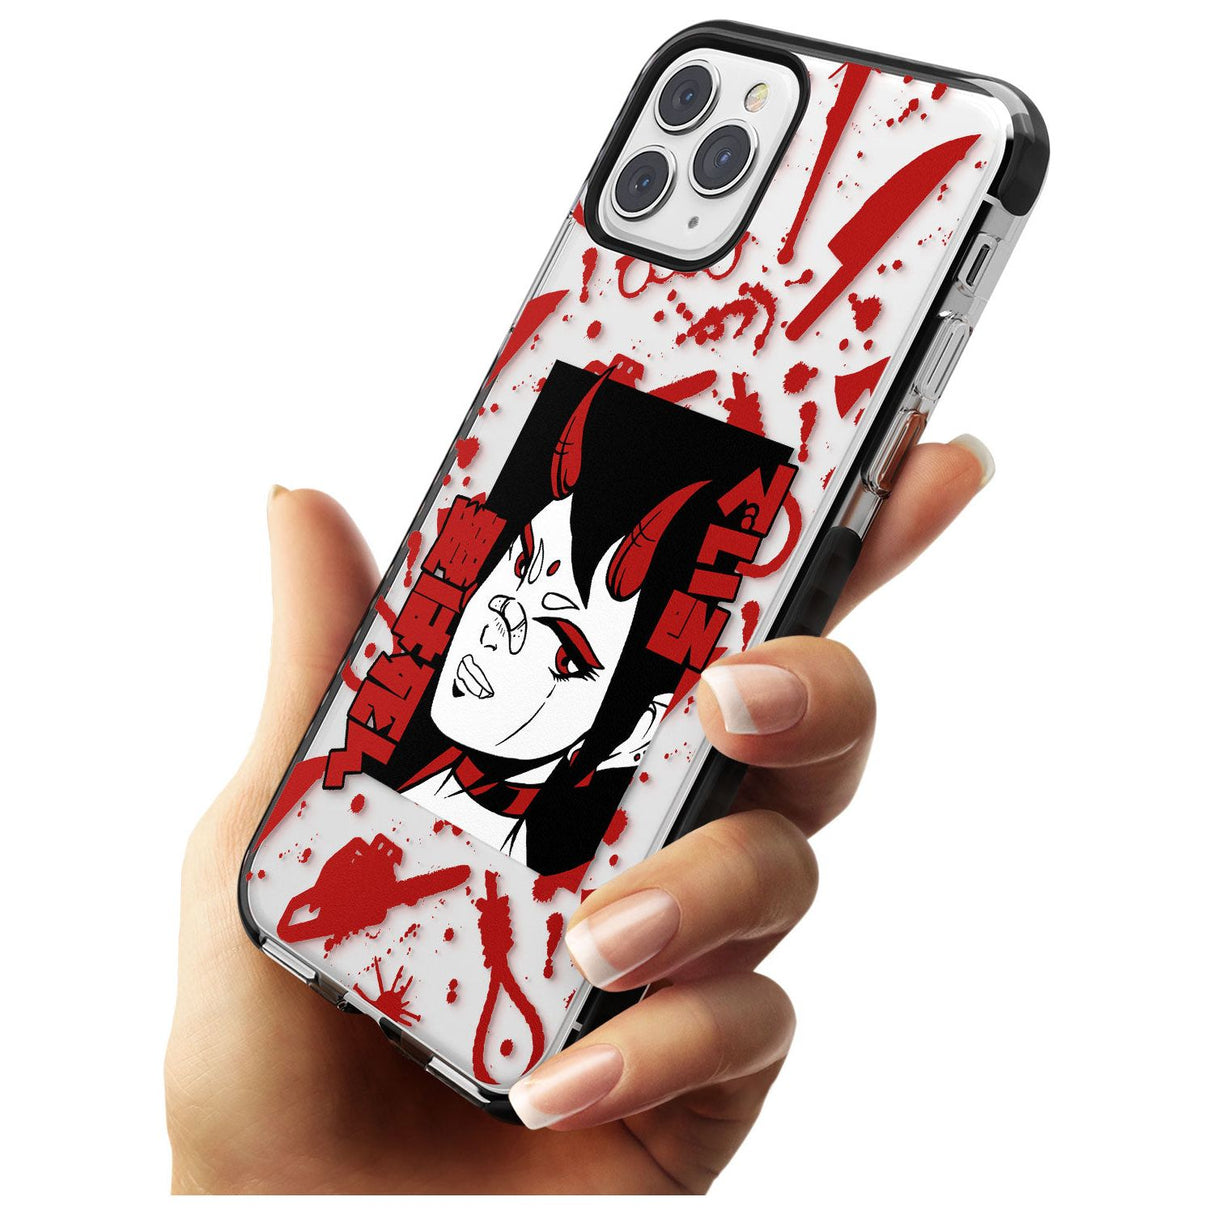 She's a Devil Black Impact Phone Case for iPhone 11